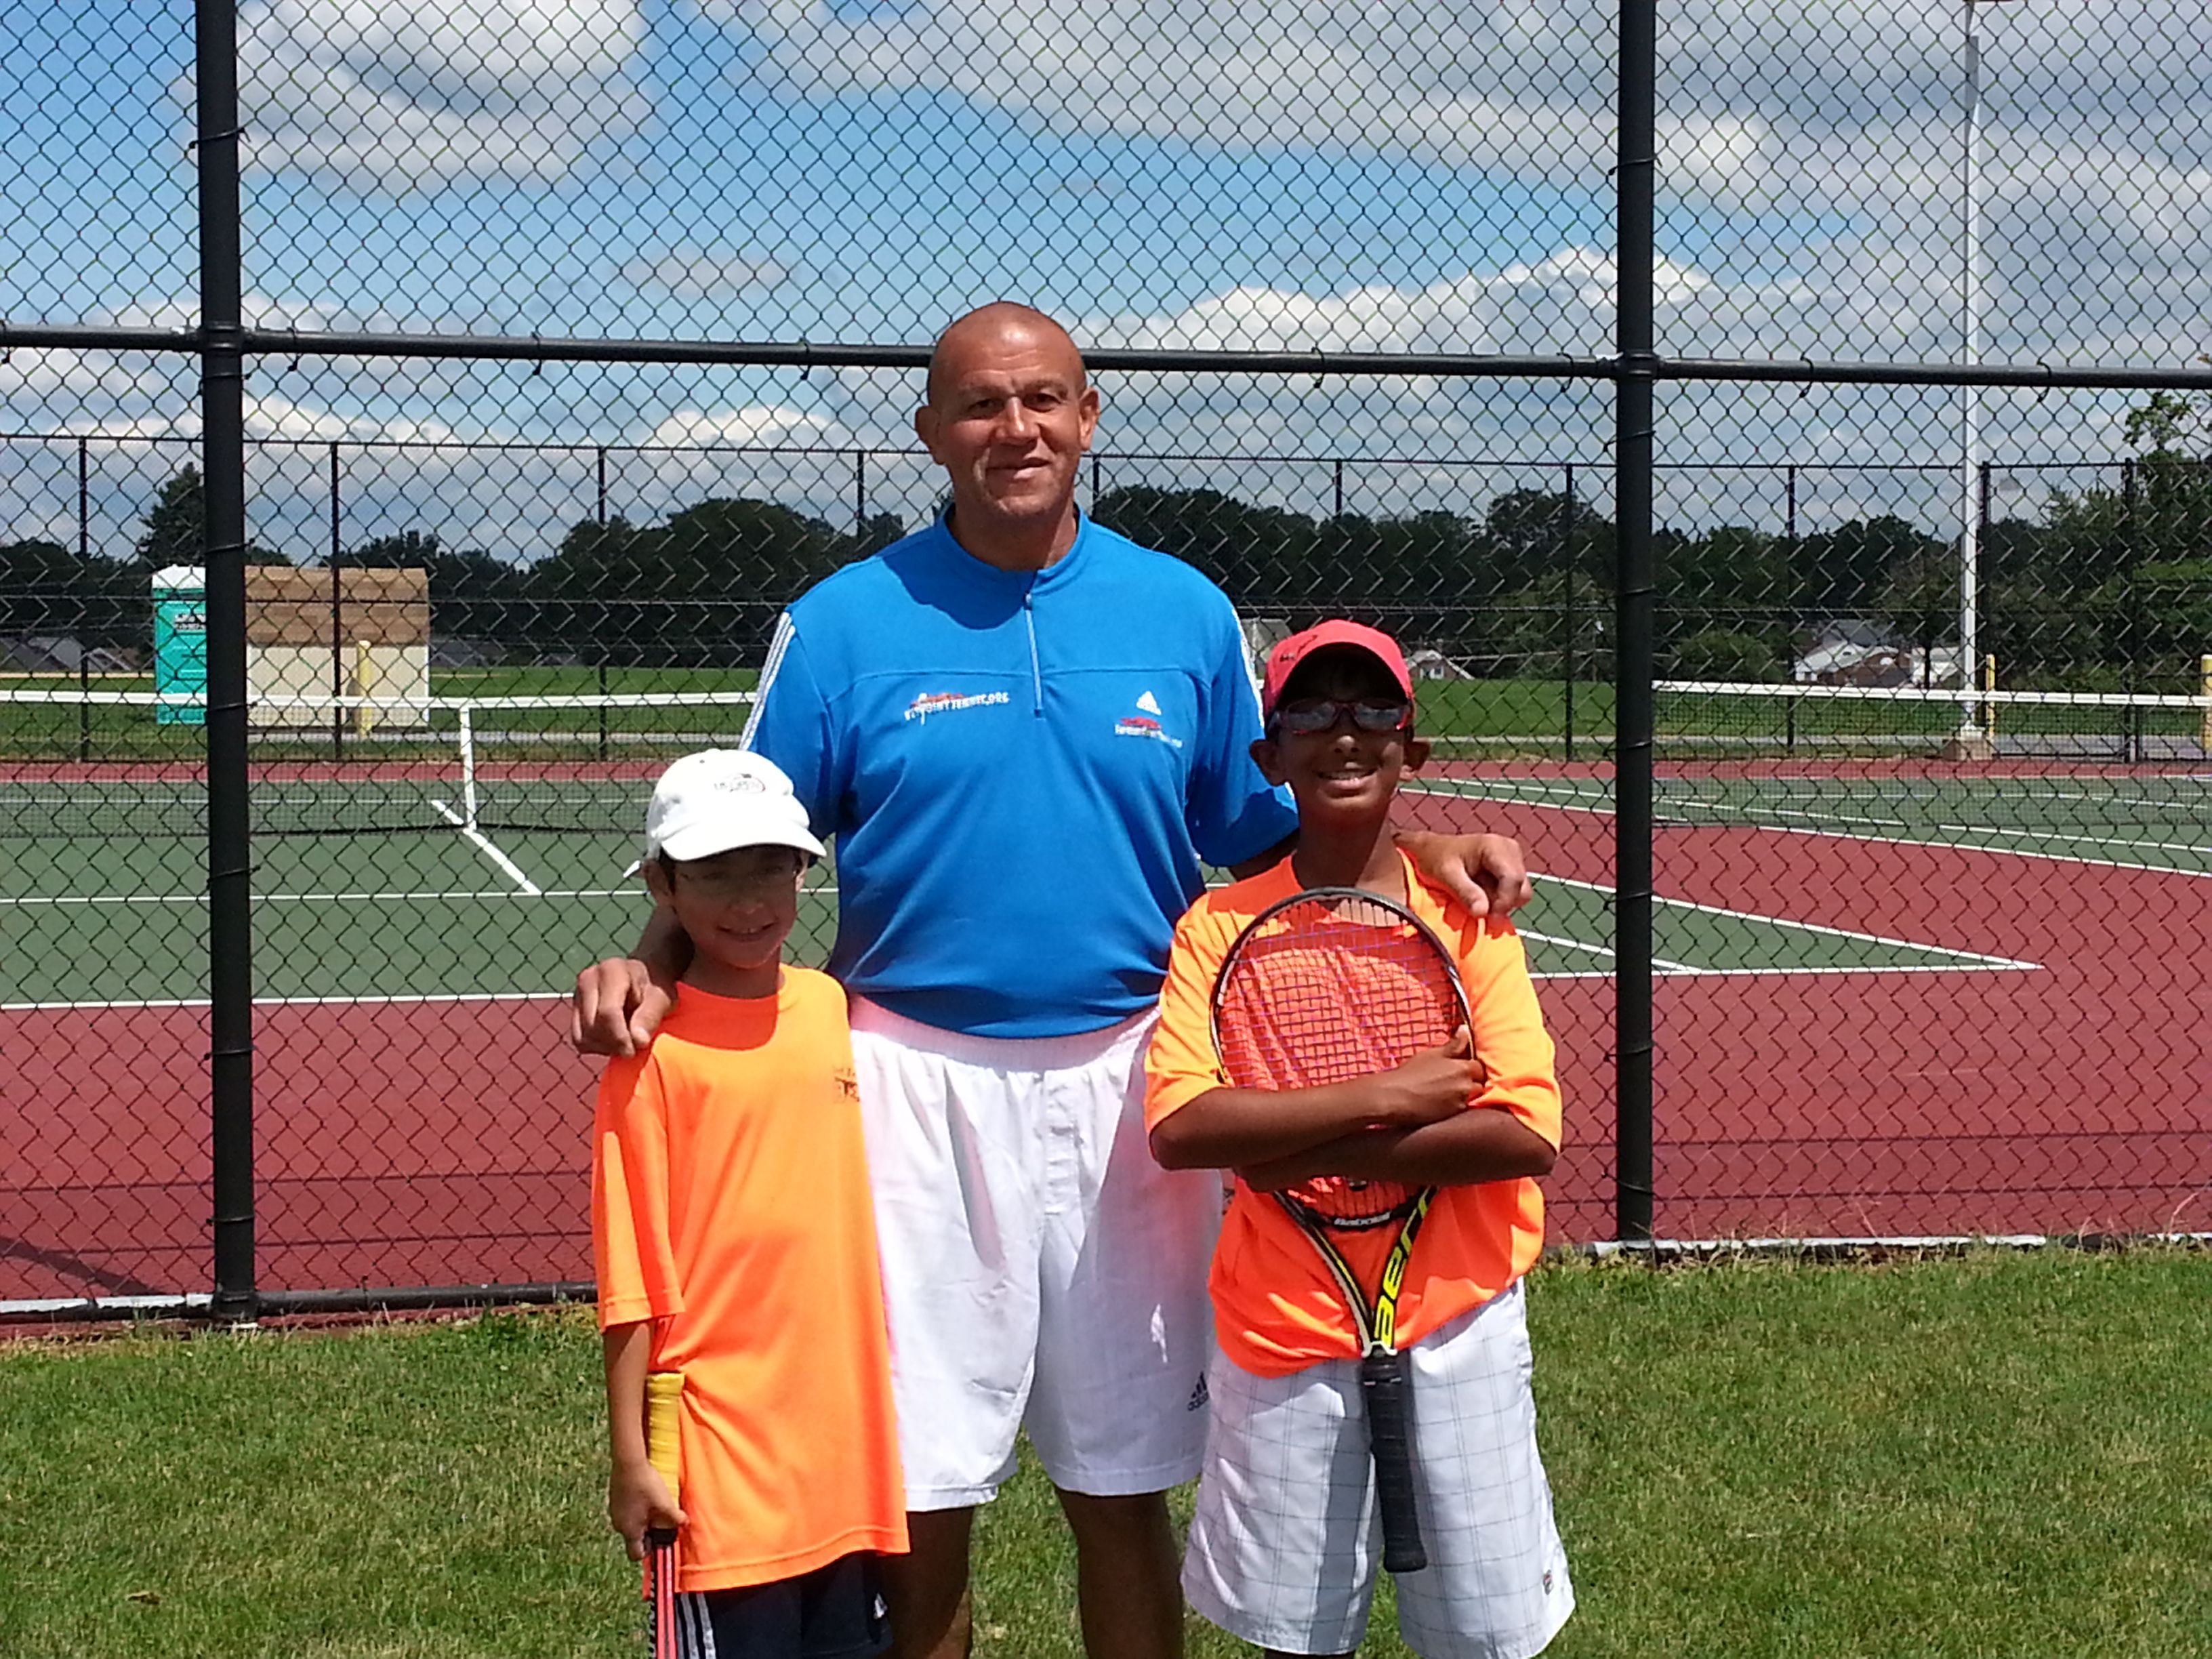 Delaware Academy youth participating in the Set Point Tennis Open